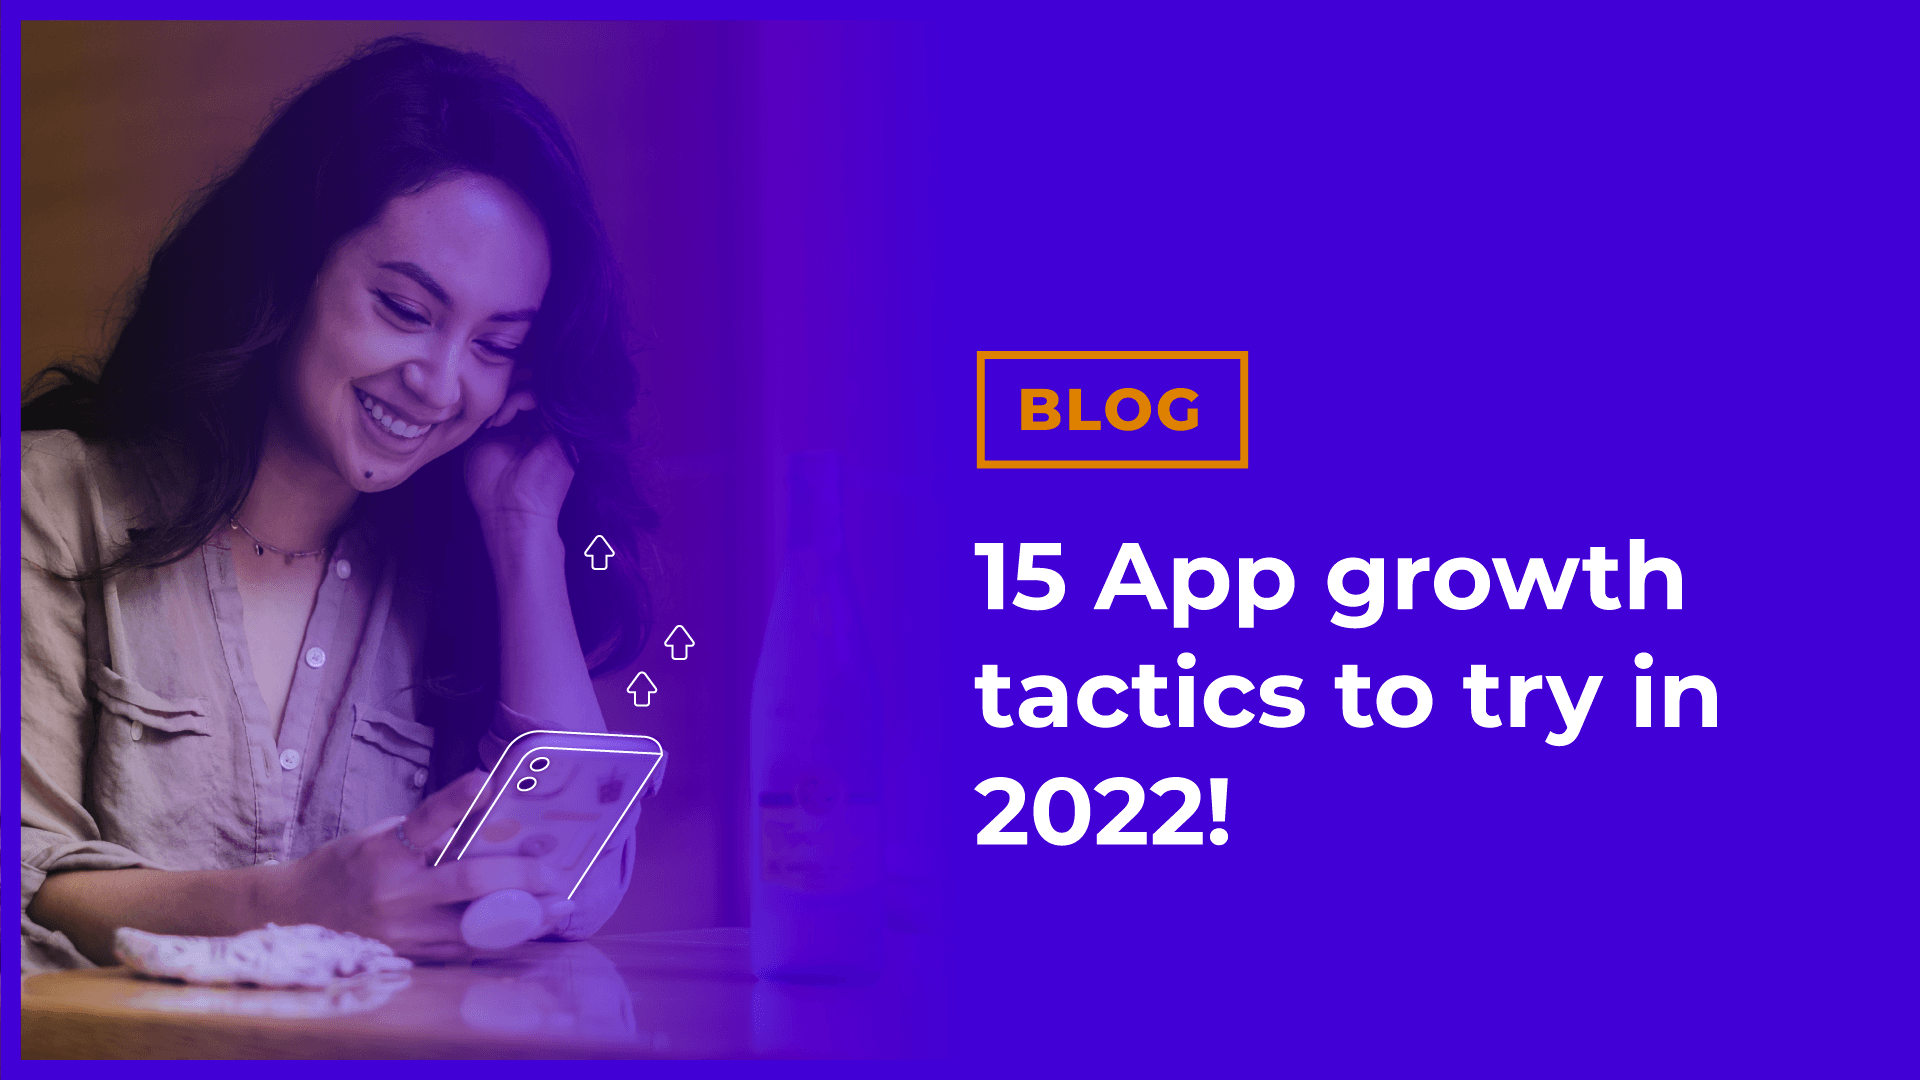 Grow your app in 2022 with these 15 app growth tactics!